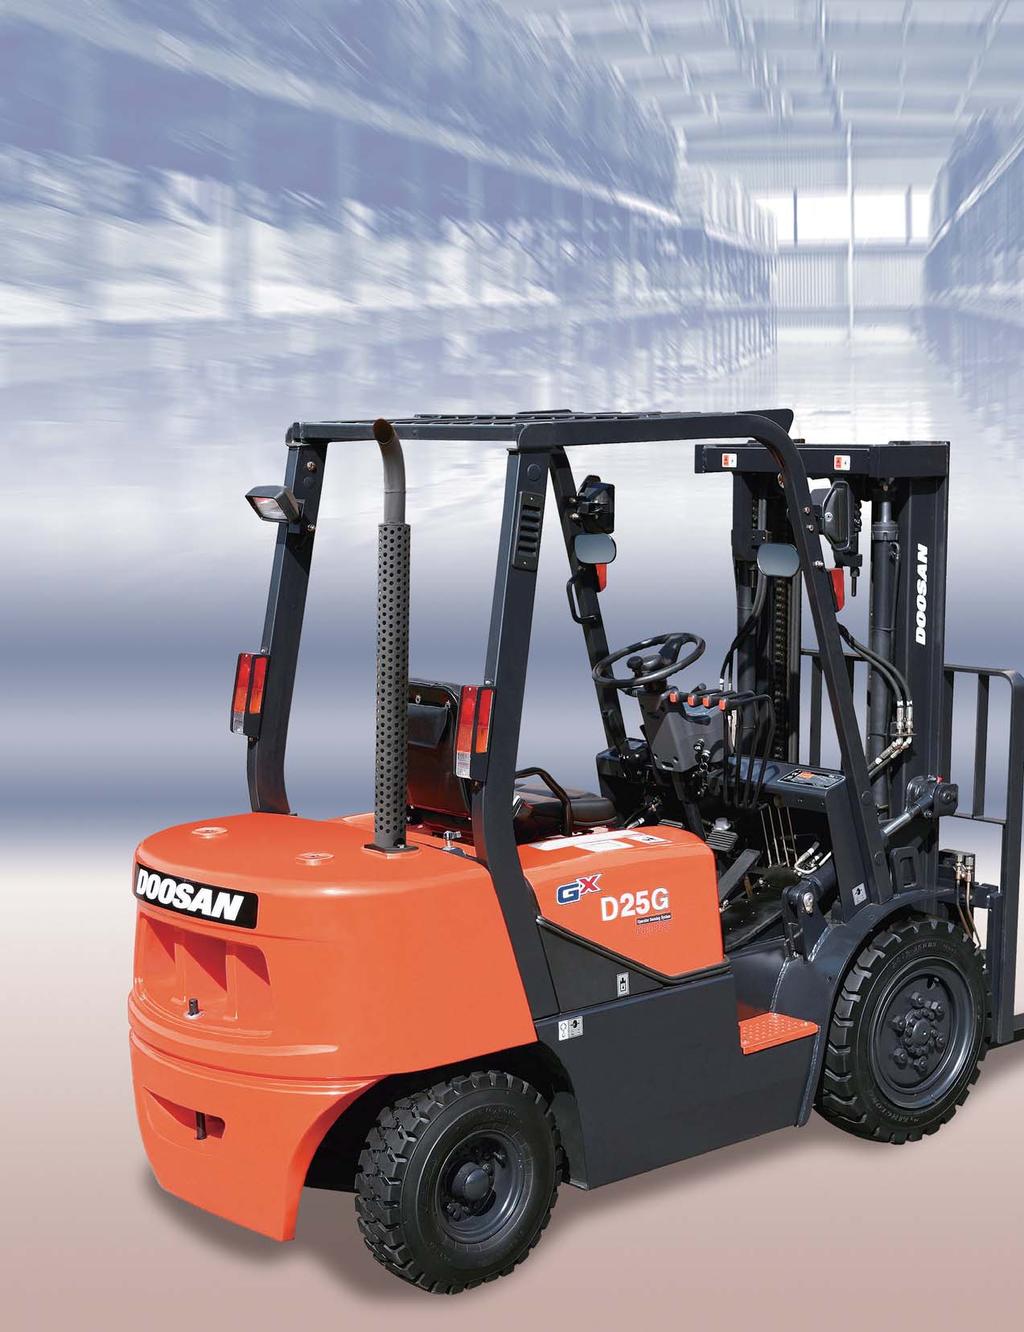 Manage your profits and performance with Doosan forklifts!